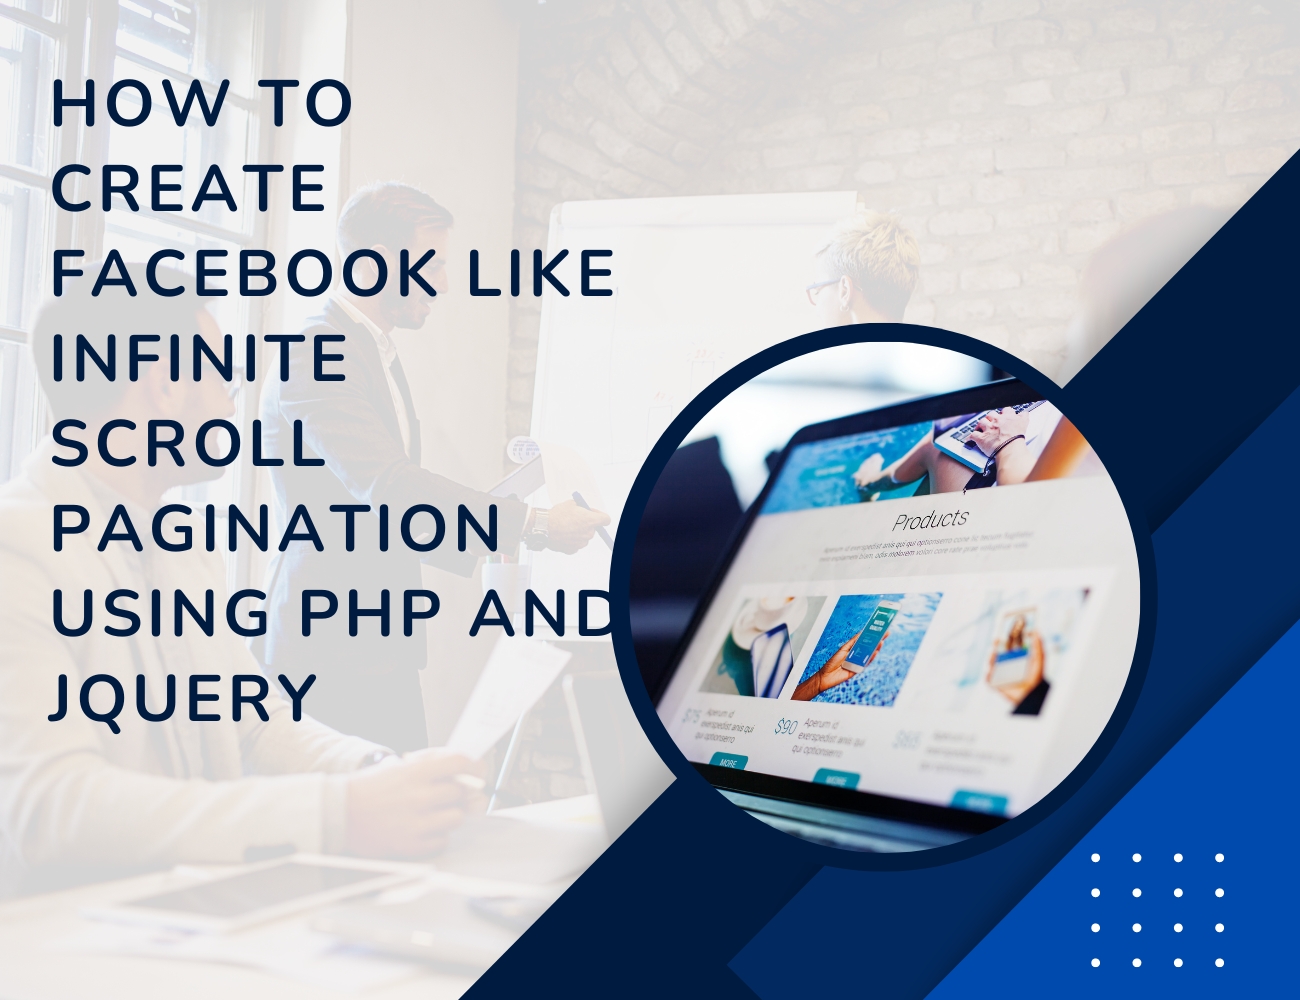 How to Create Facebook Like Infinite Scroll Pagination using PHP and jQuery (1)